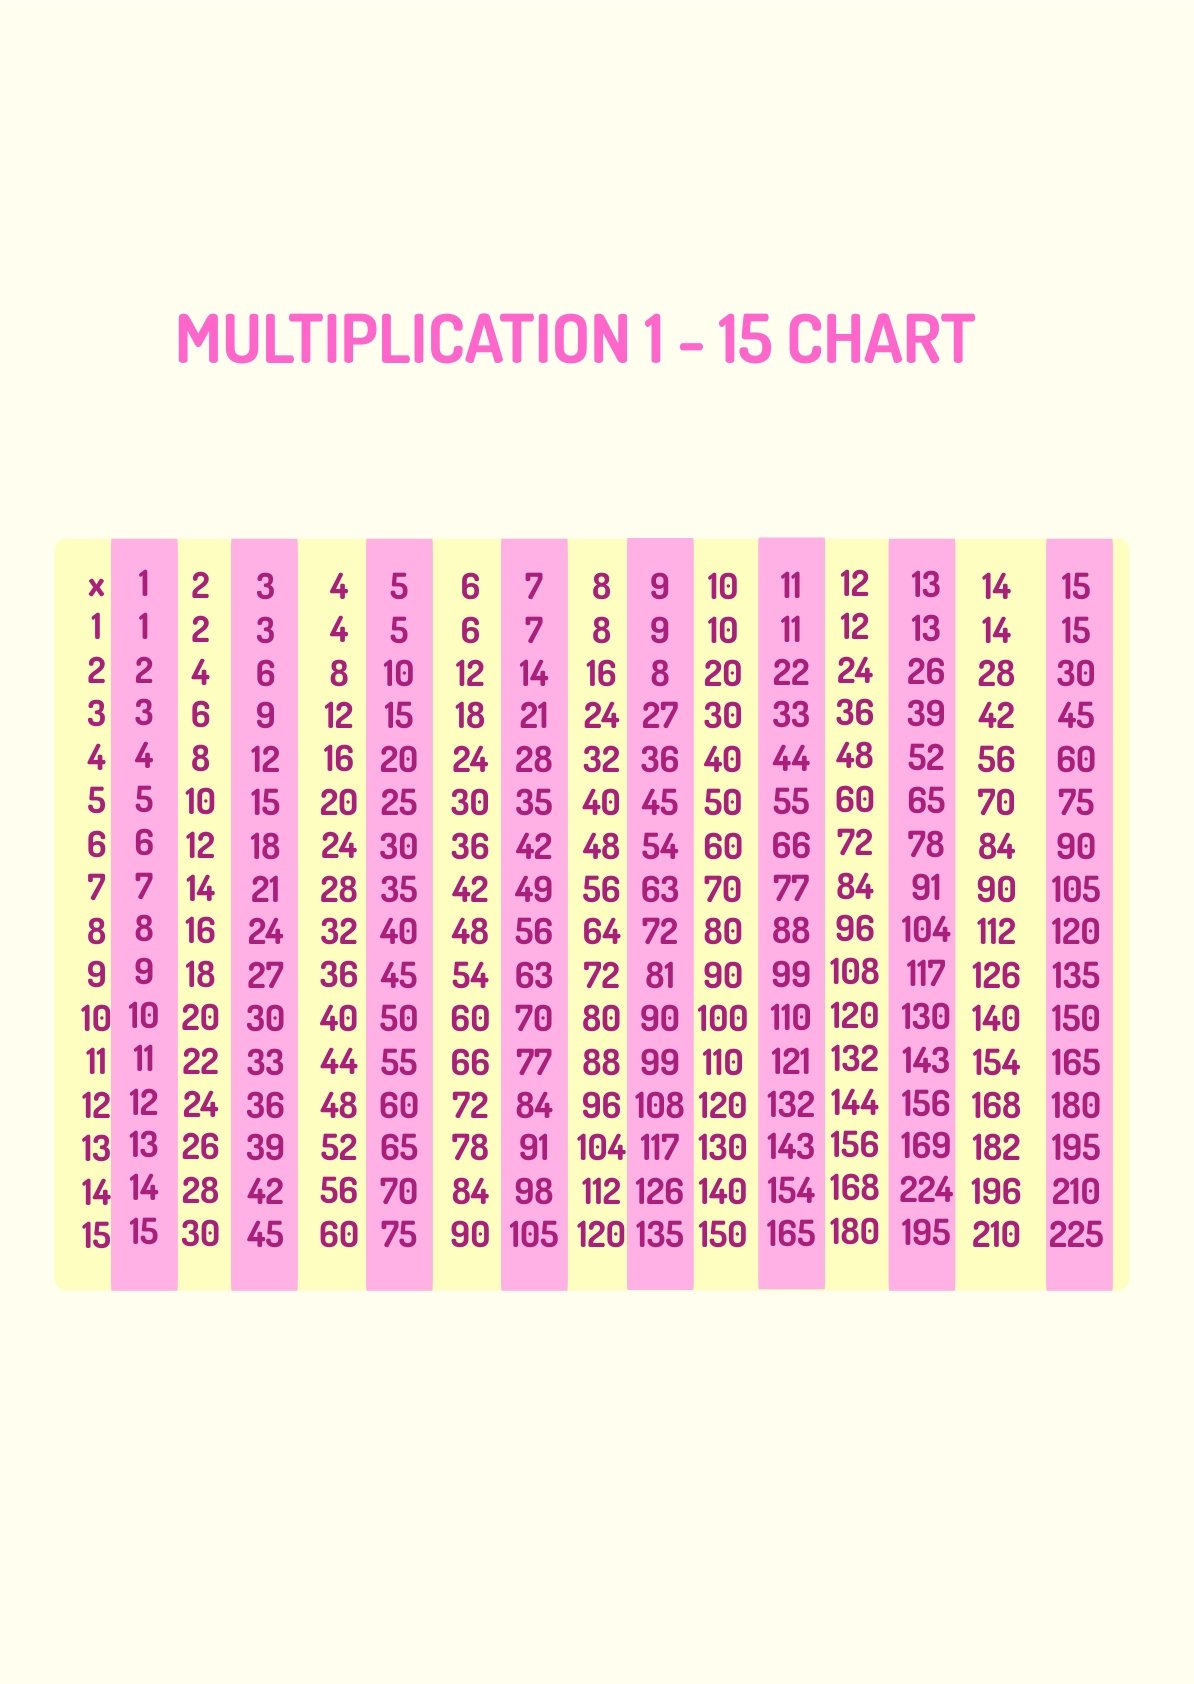 free-multiplication-chart-1-15-download-in-pdf-illustrator-template